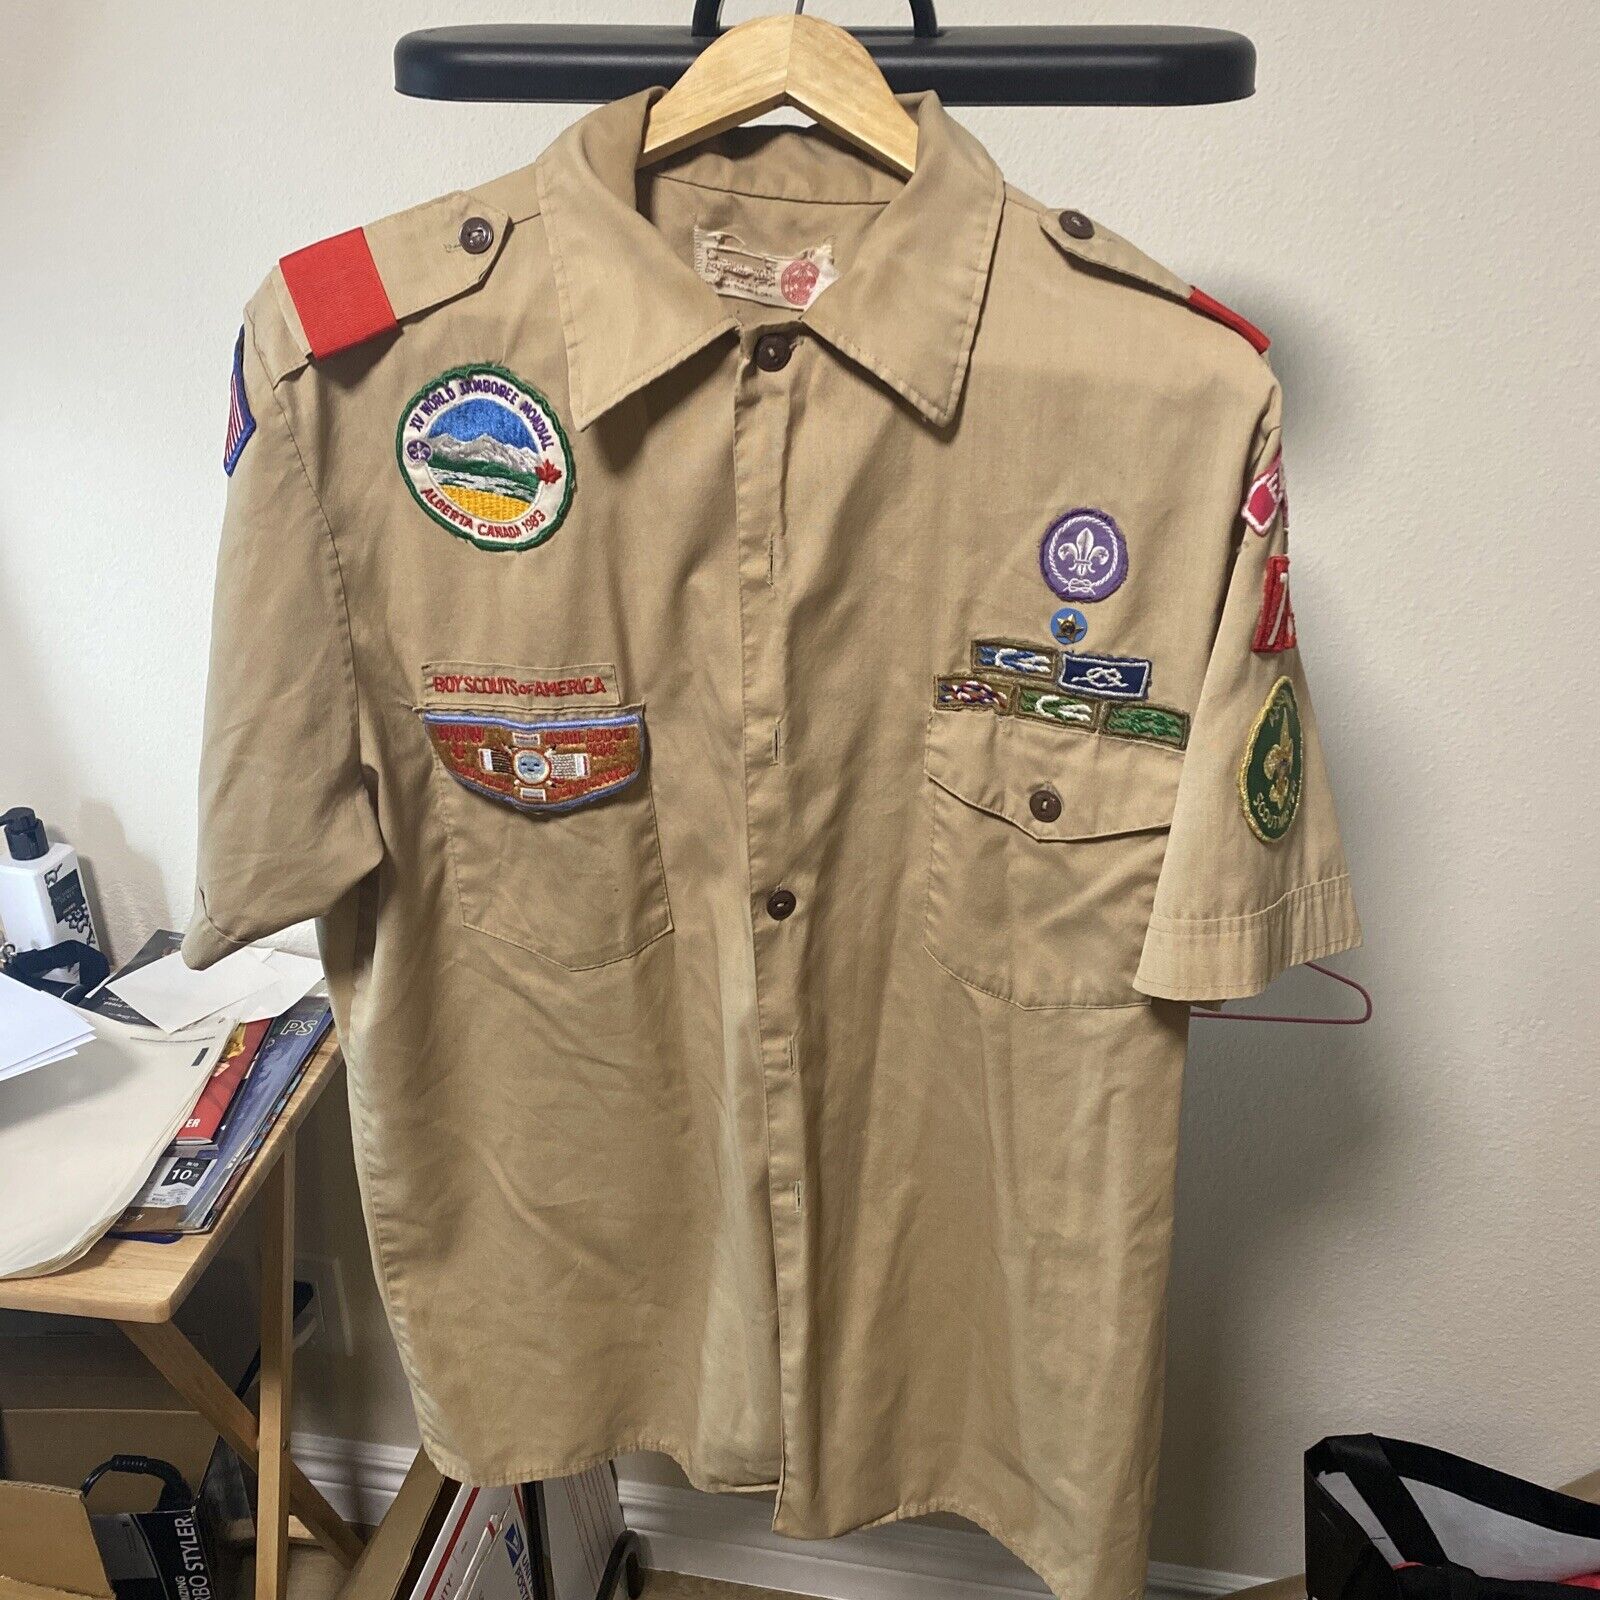 Vintage 80’s Boy Scouts of America Official Shirt With Patches And 40 Years Pin